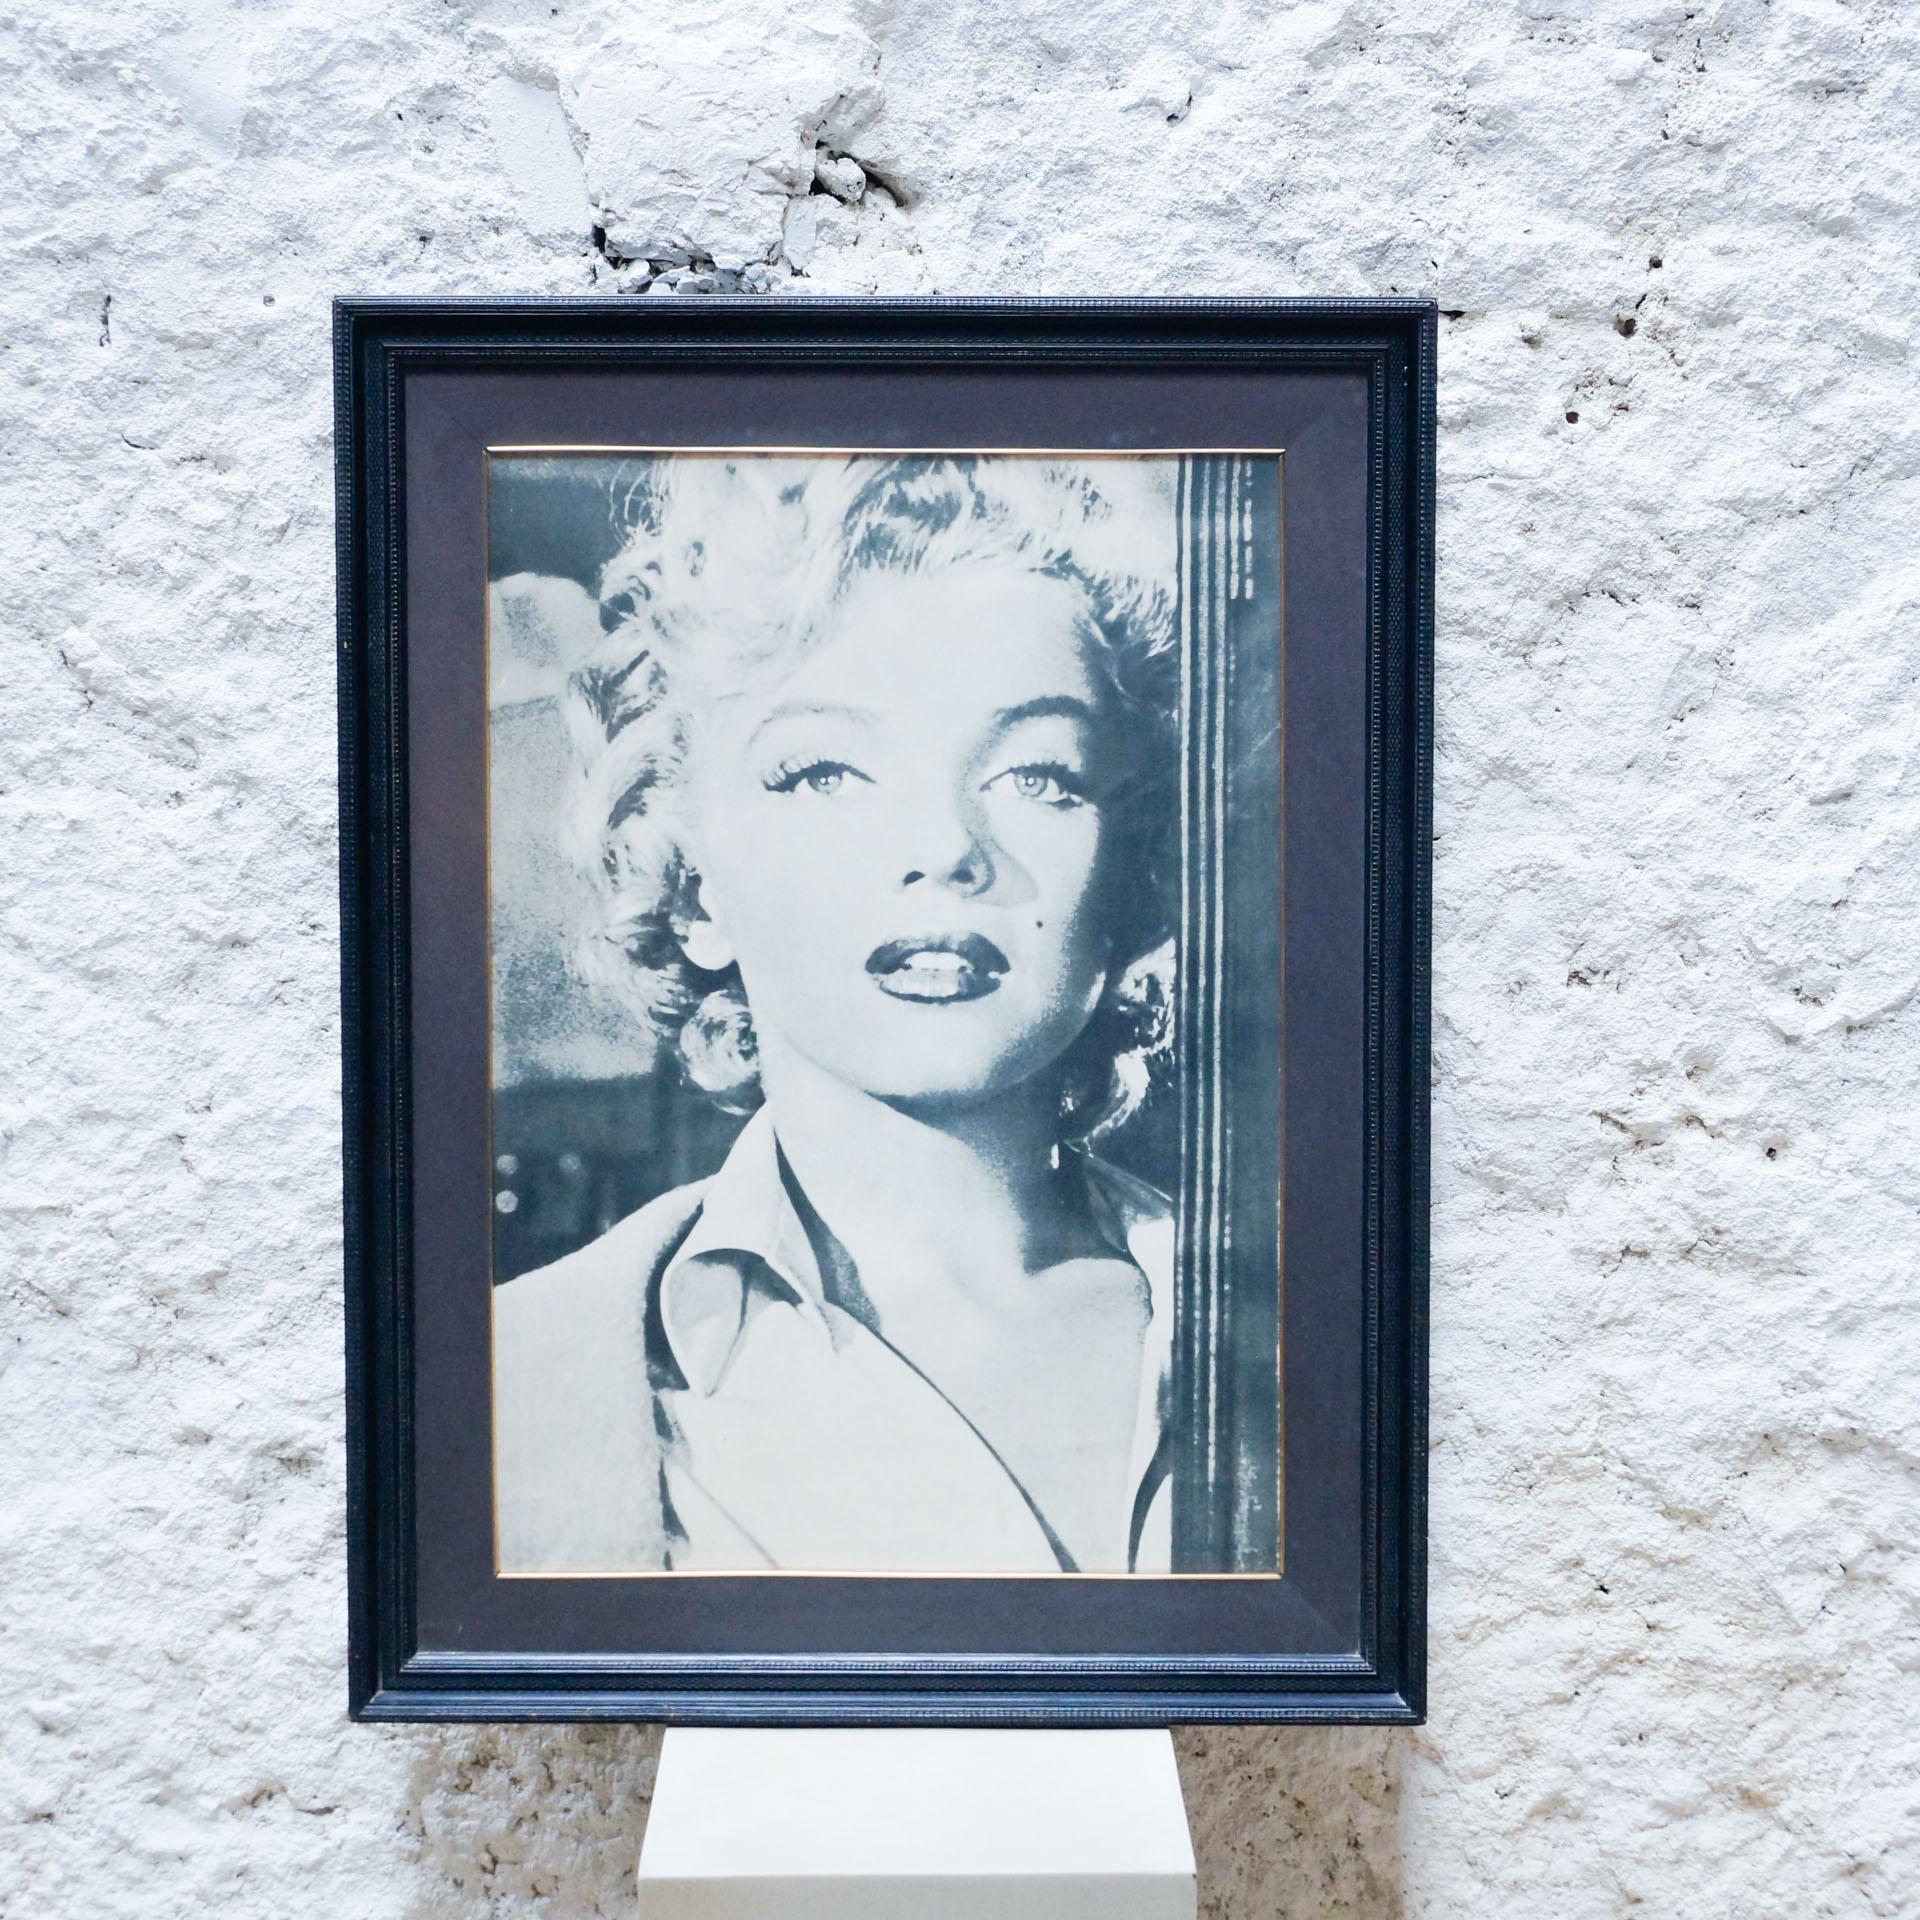 Marilyn Monroe photography print by unknown artist, circa 20th century.

In original condition, with minor wear consistent with age and use, preserving a beautiful patina.
Frame included.

Material:
Paper

Dimensions:
D 4 cm x W 85 cm x H